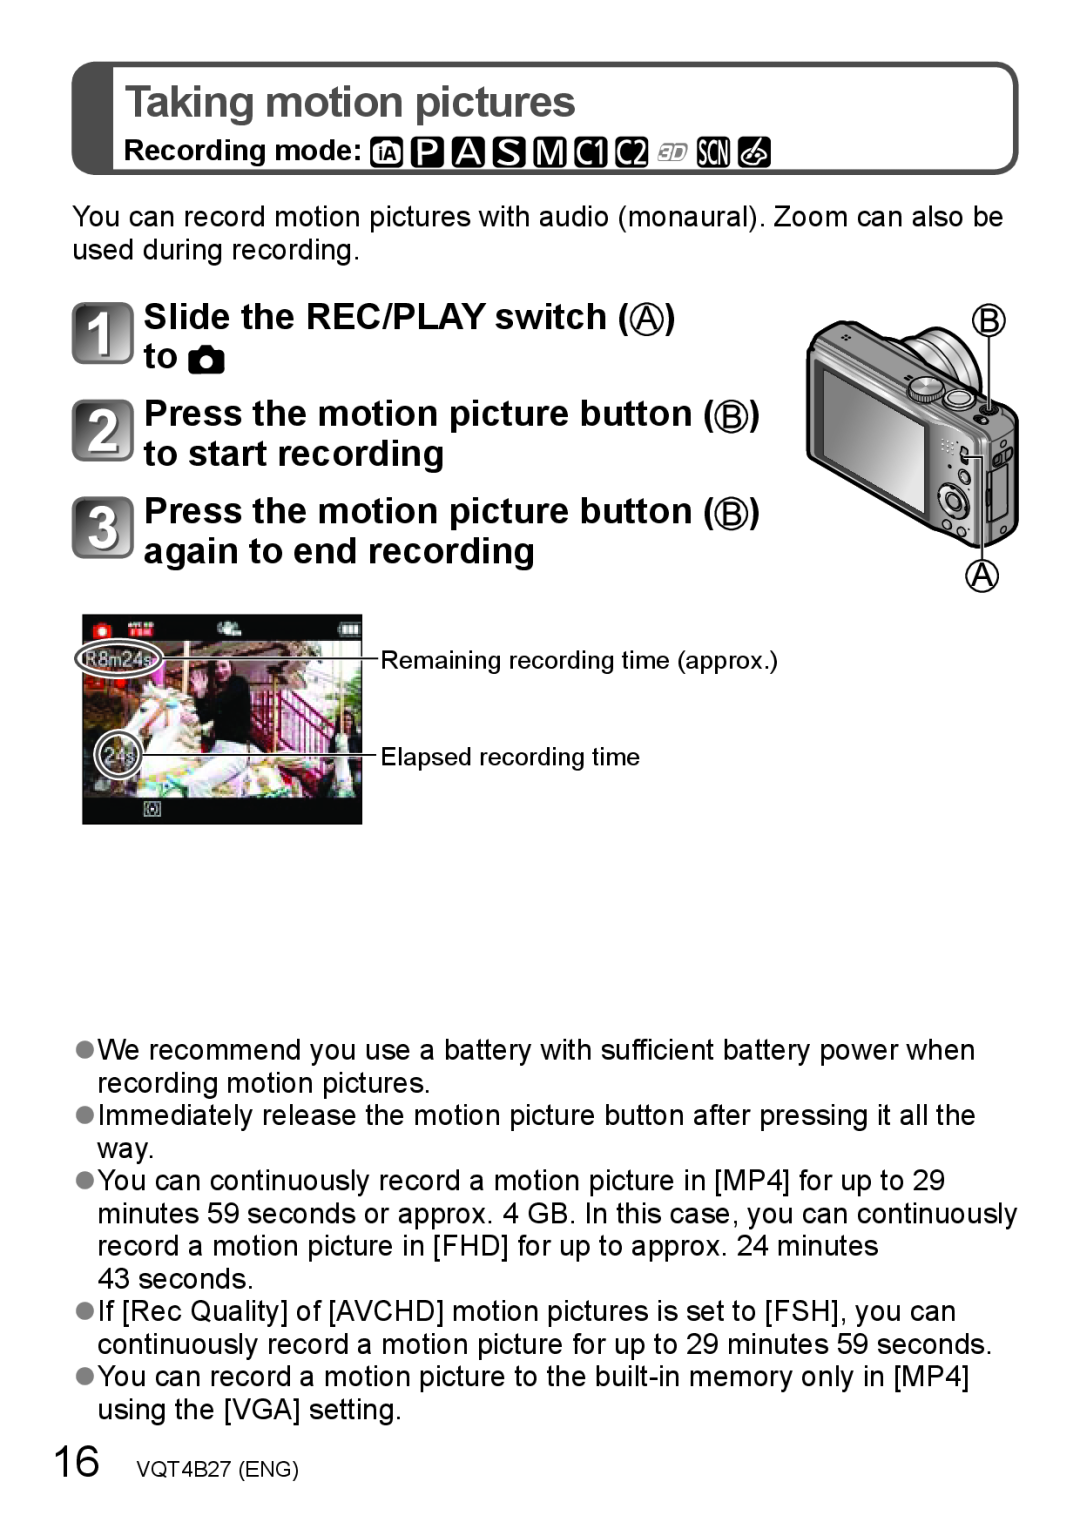 Panasonic DMC-ZS15S, M1211KZ0, VQT4B27, DMCZS15K owner manual Taking motion pictures, Slide the REC/PLAY switch to 